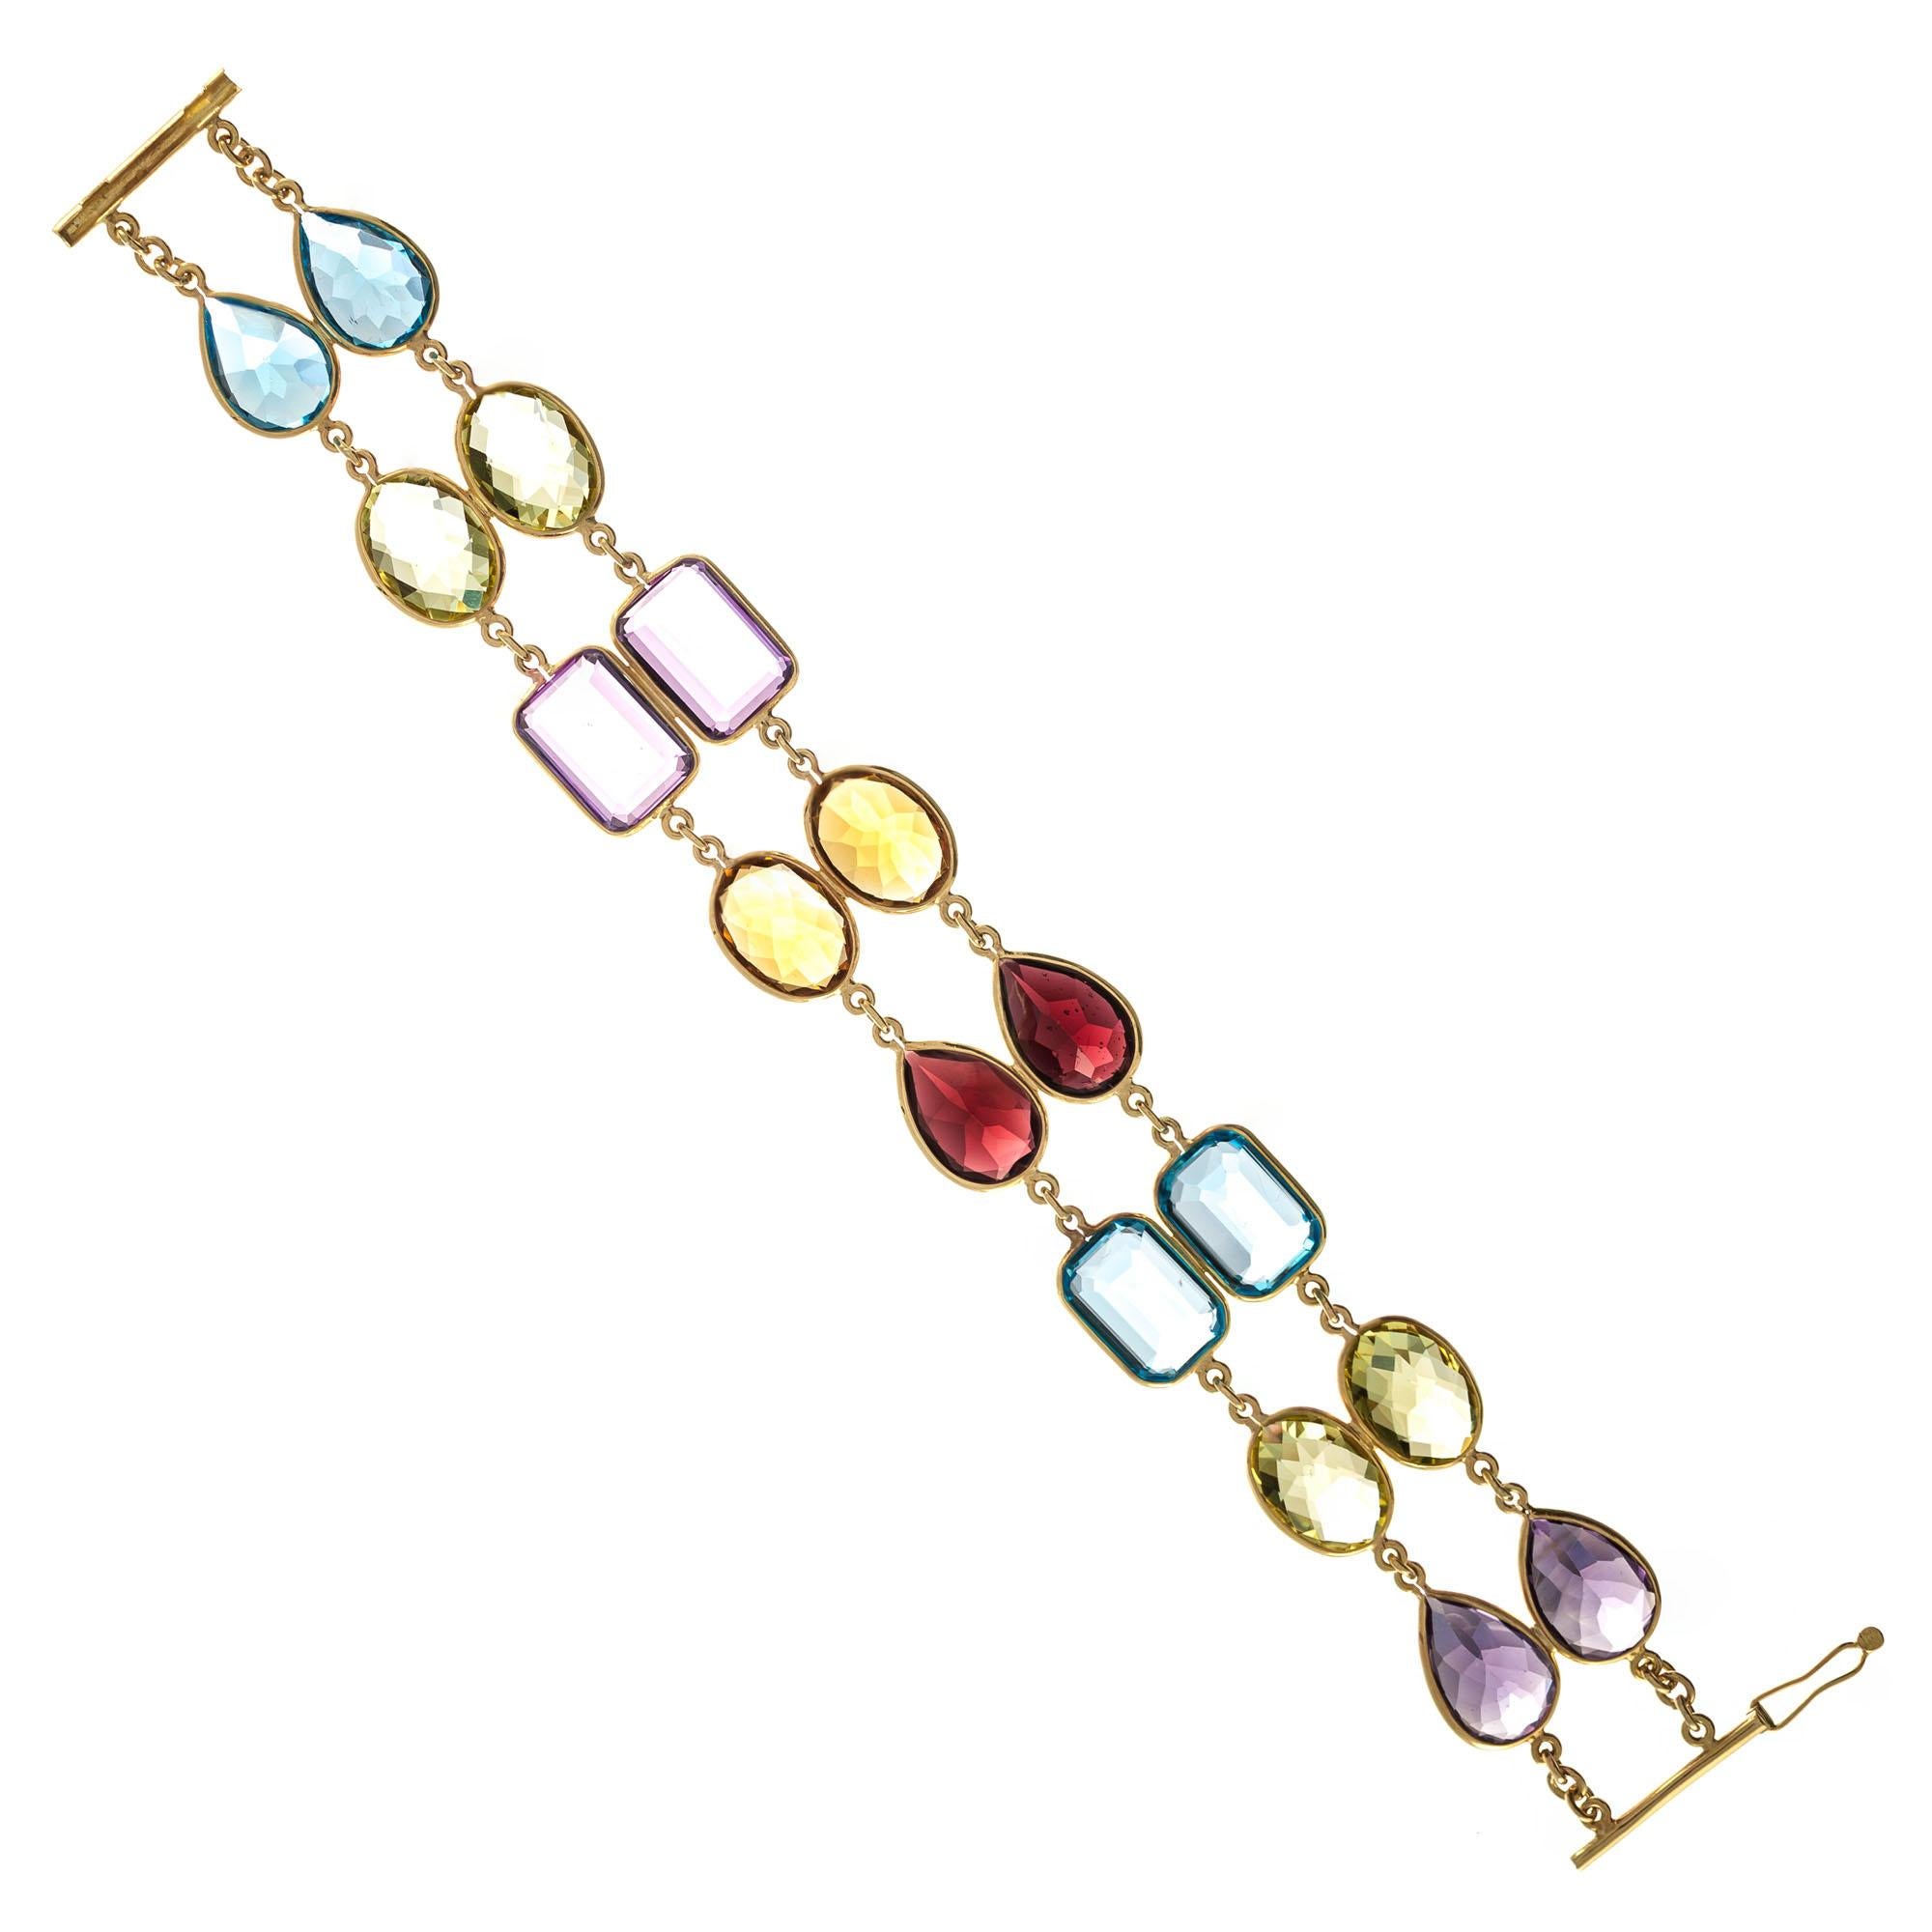 Bright multi-color two row gemstone bracelet in 14k yellow gold 

2 pear shape purple amethyst, approx. 9.00cts 
2 rectangular purple amethyst, approx. 12.00cts
2 pear shape blue topaz, approx. 11.00cts
2 rectangular blue topaz, approx. 14.00cts
2